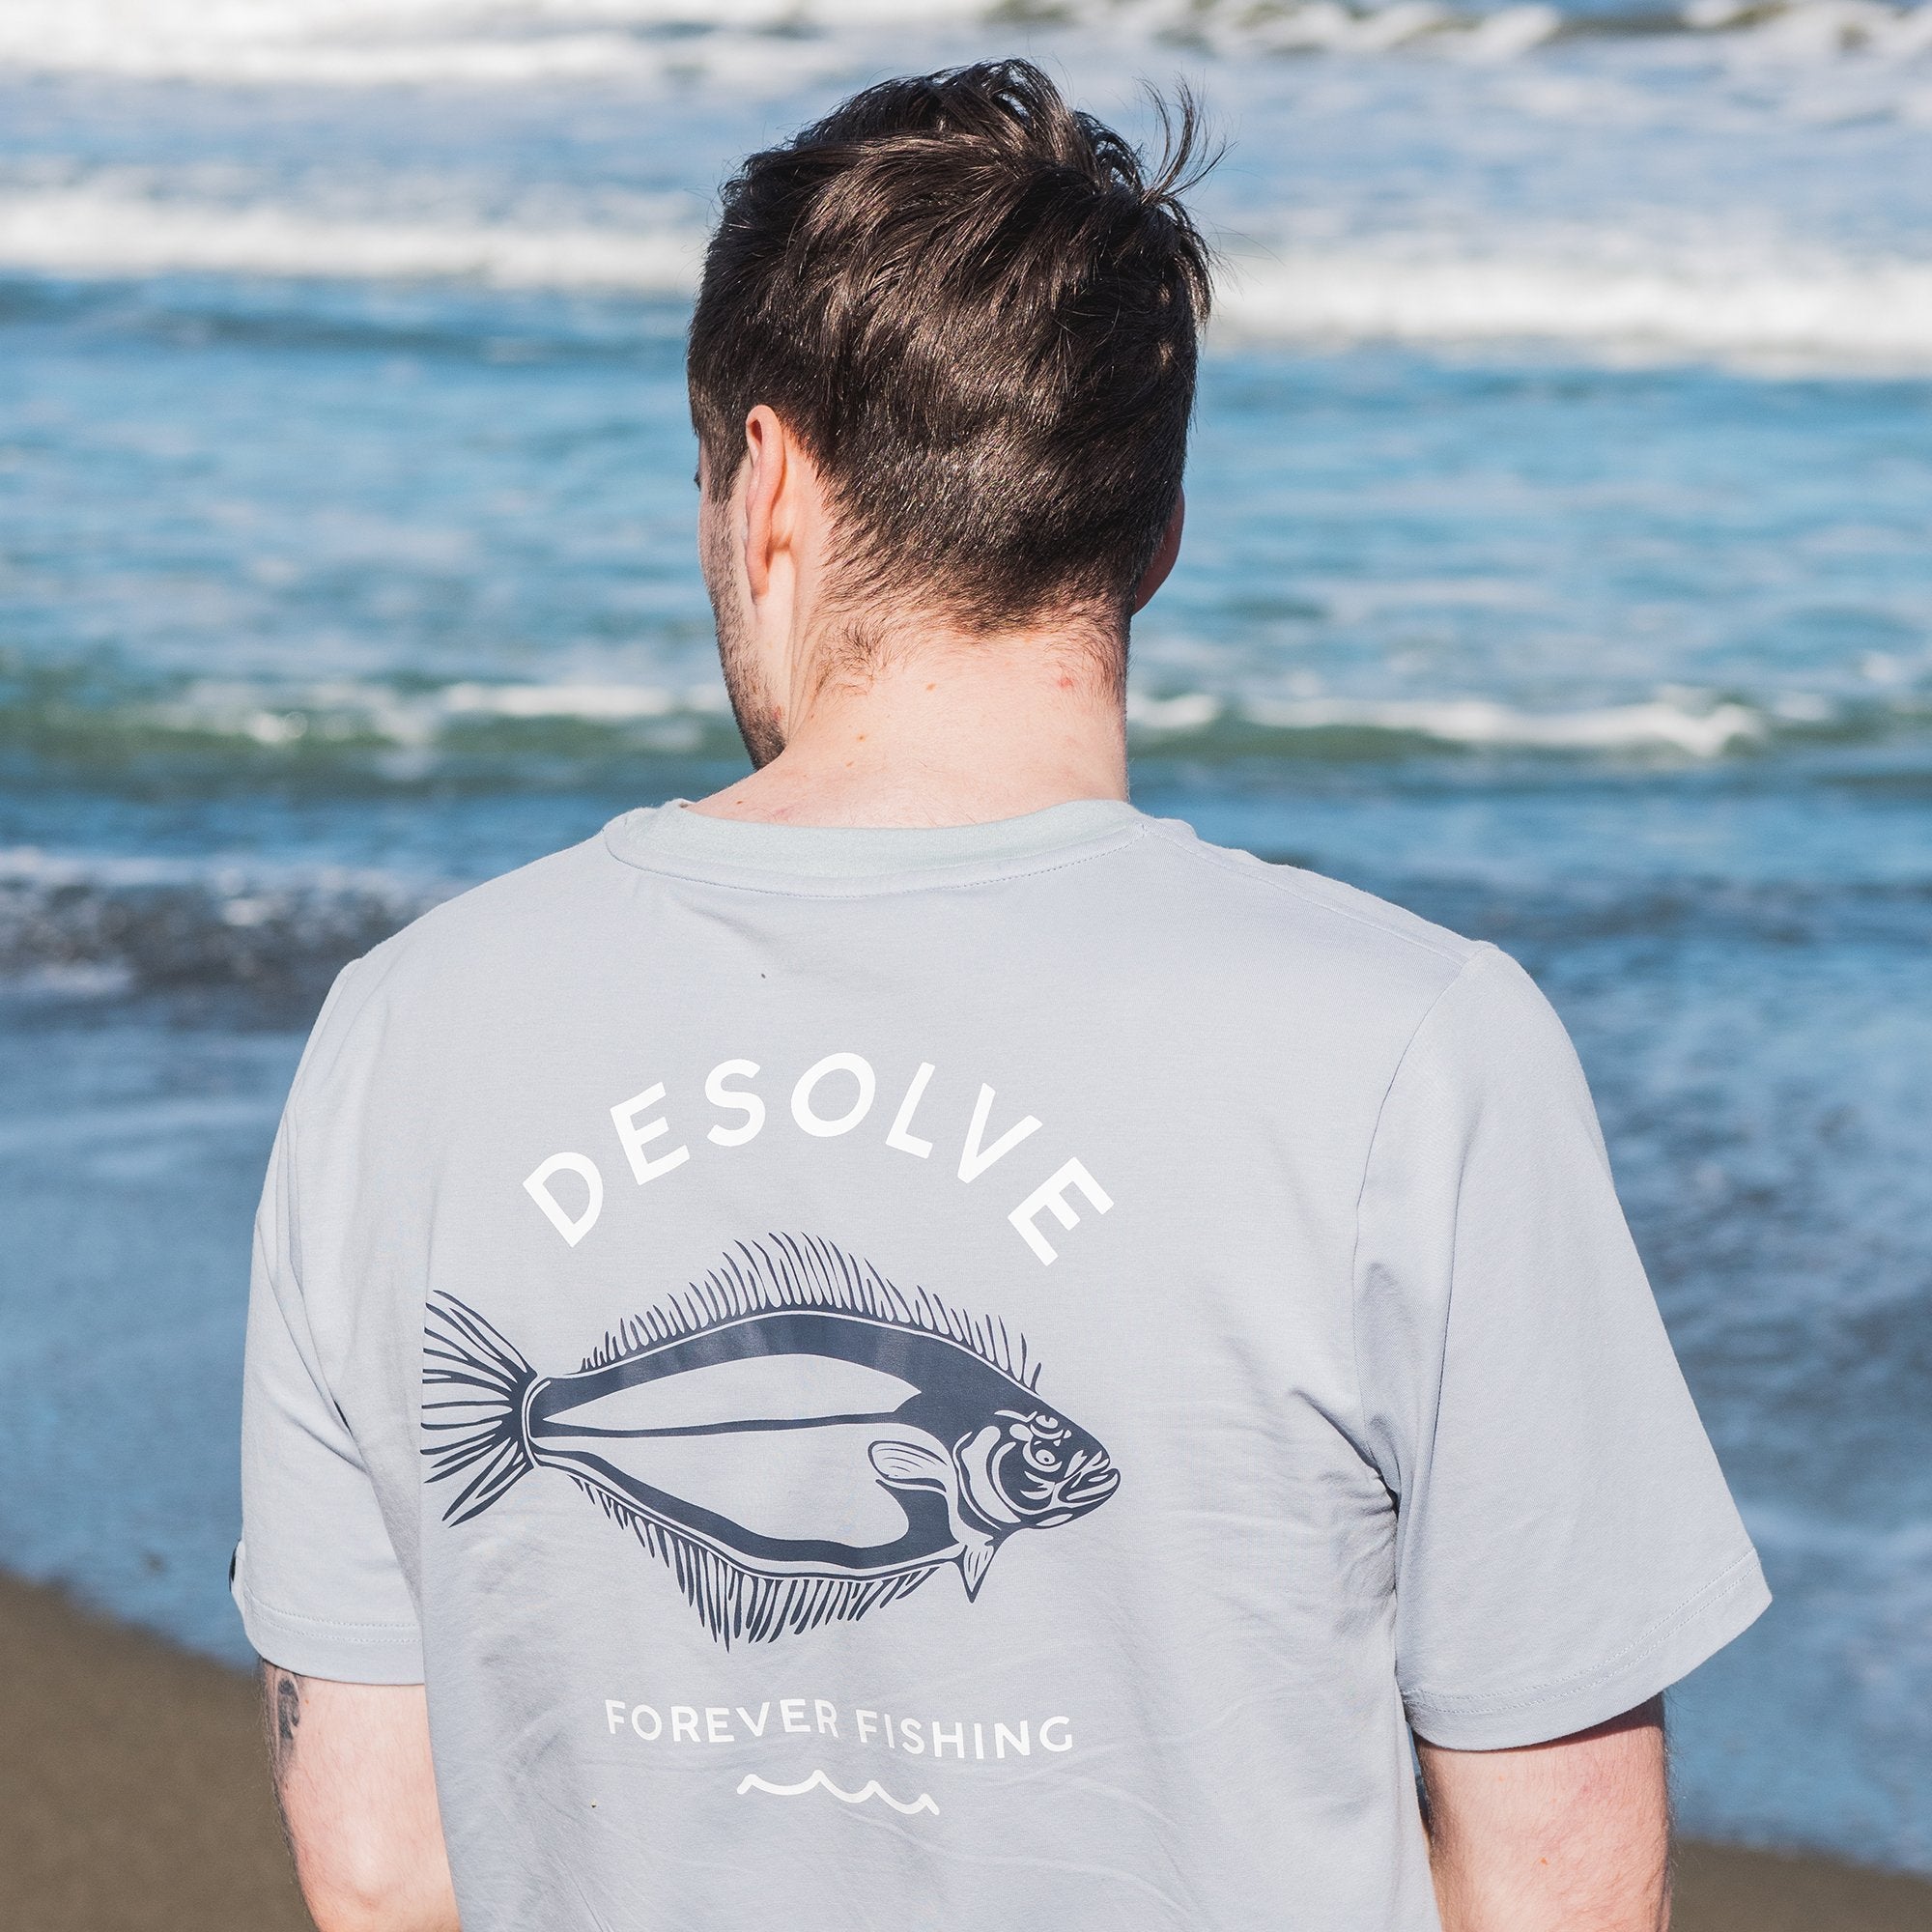 Desolve Supply Co, Forever Fishing LS Tee, UPF 50+